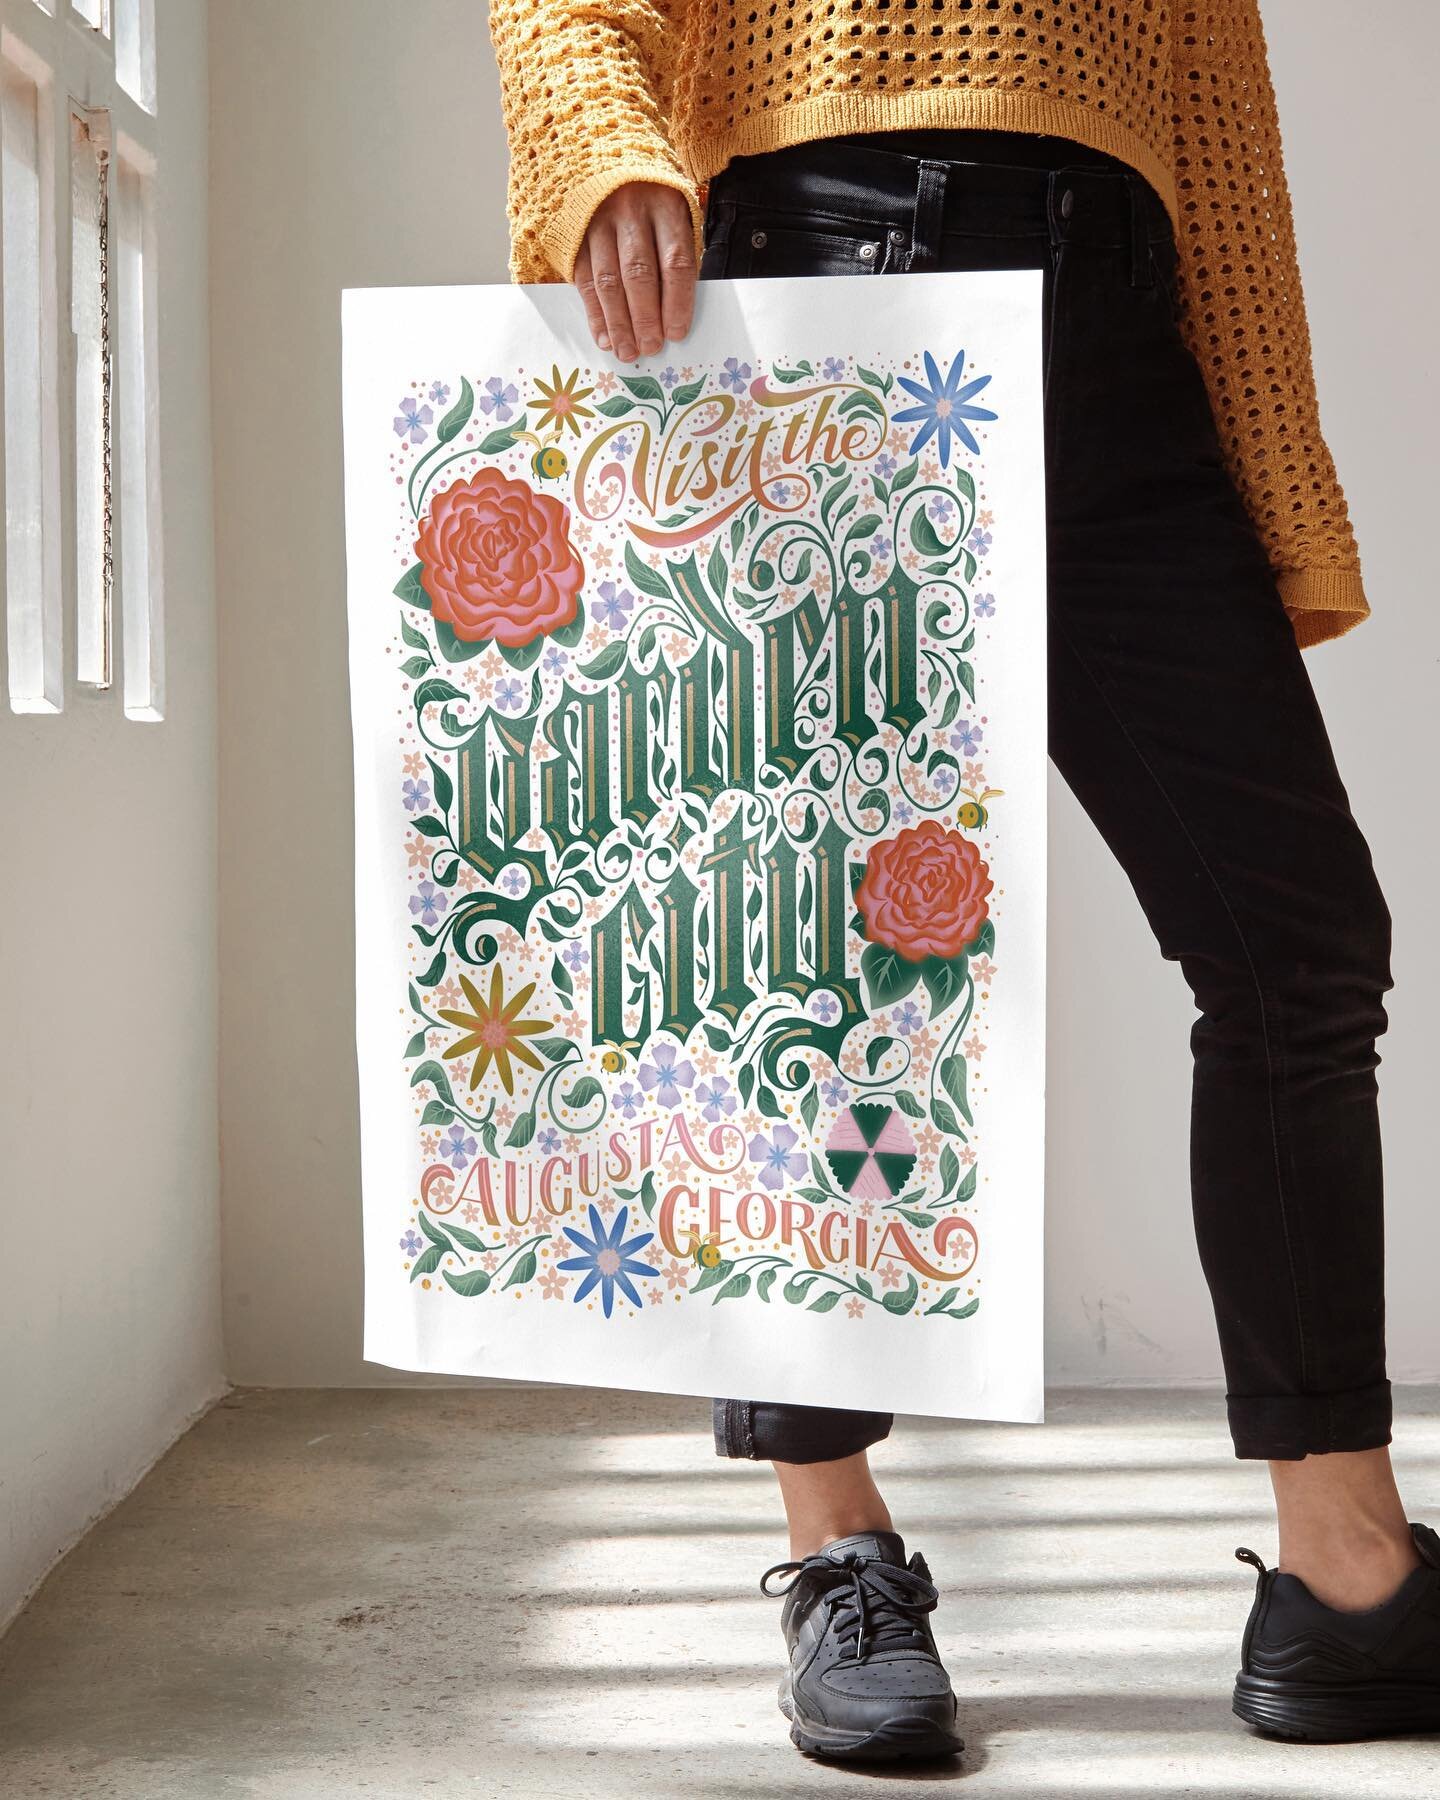 Tomorrow is the big day! Hope to see you out at the Augusta Poster Show at CANDL Fine Art in downtown Augusta from 6-9pm. (Friday is the VIP preview which is $10, Saturday is free!)

I had so much fun creating this detailed lettering piece with allll